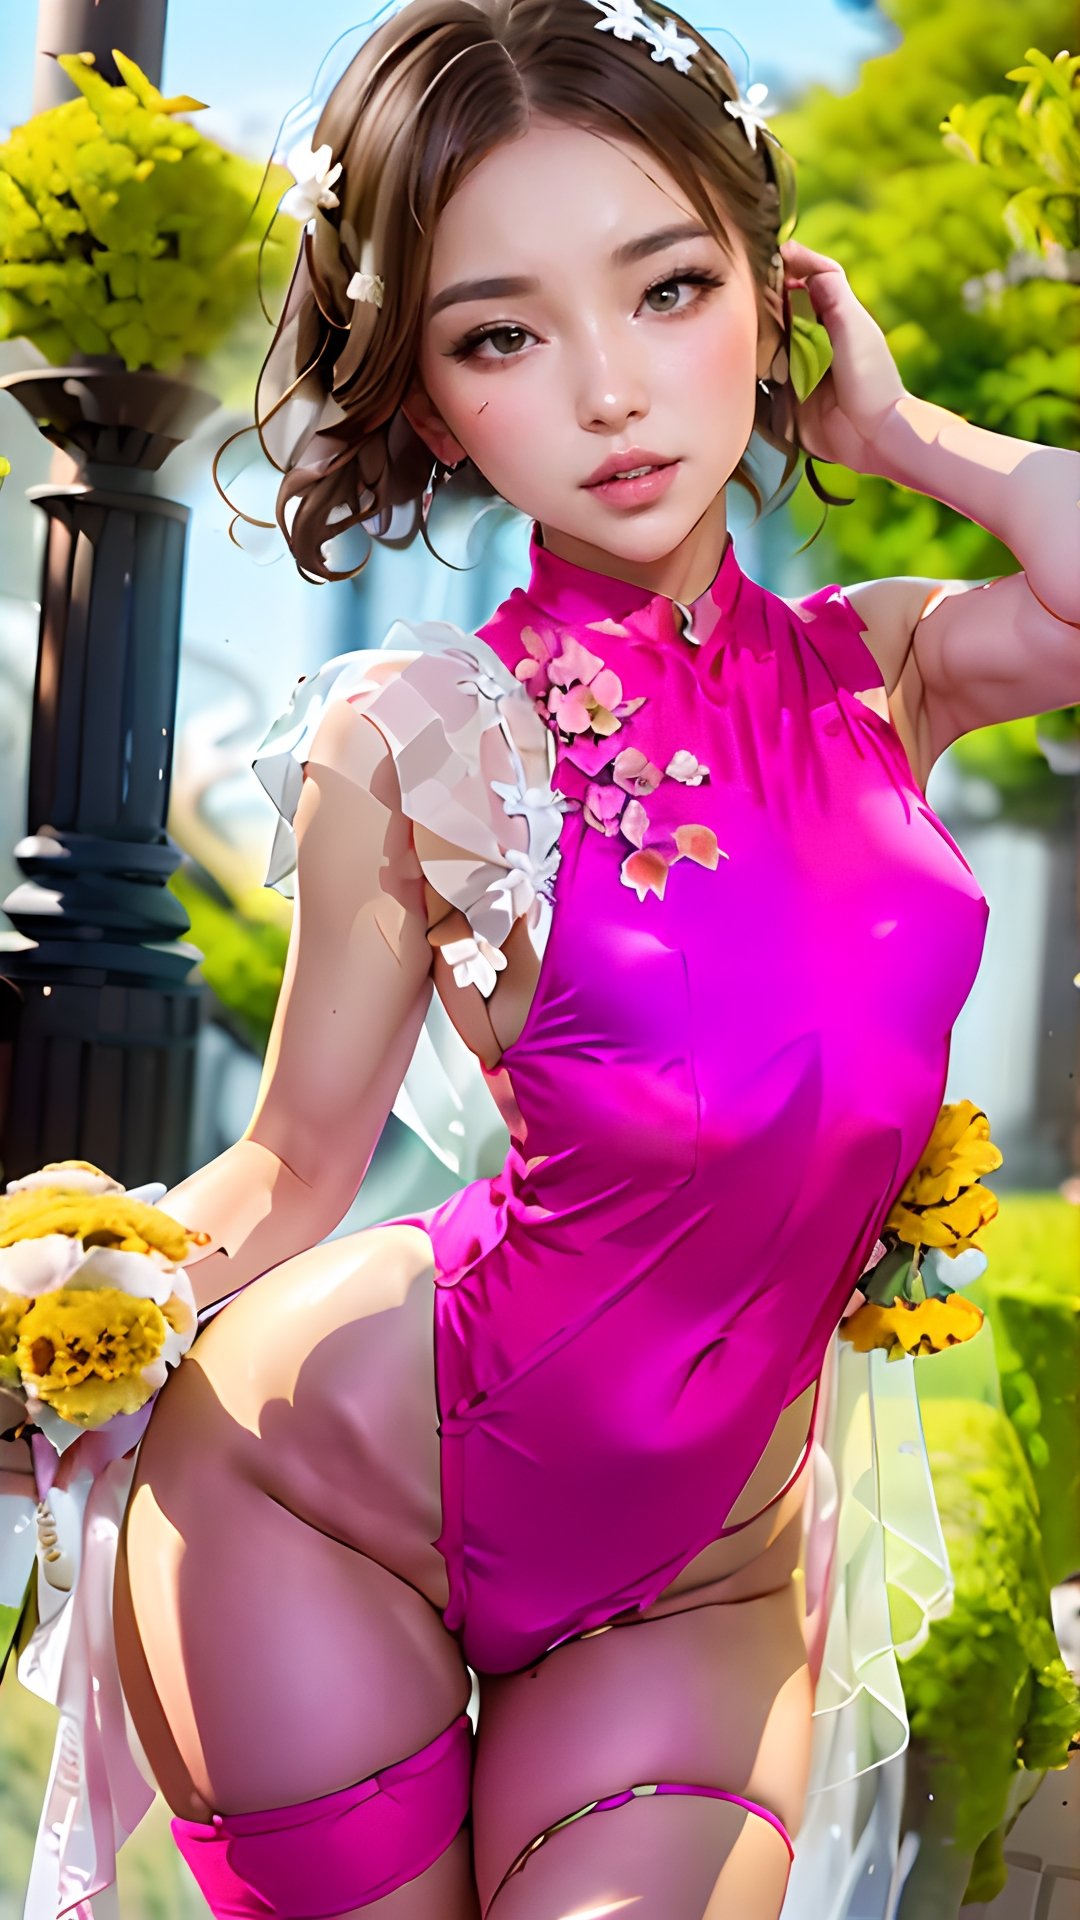 (hentai lingerie:1), sexy front view, pink and yellow flowers blooming, depth of field, Pink flowers and lighting bokeh as background , 1girl, (chinese naughty beauty:1) snow-white delicate skin, long light brown curly hair, and a silver hairpin on her head. The eyes are a deep brown color big and charming, wearing pink and white long Boss dress, choker, full of mysterious stories. With pale pink lips, smiling and loughing, charming and cute. FilmGirl, xxmix_girl, detailed eyes, perfect eyes, mouth small,  3d style, light bokeh backgroud,3d style,isni,Movie Still,3d,3d render,dream_girl ,blurry_light_background,,girl,see-through,